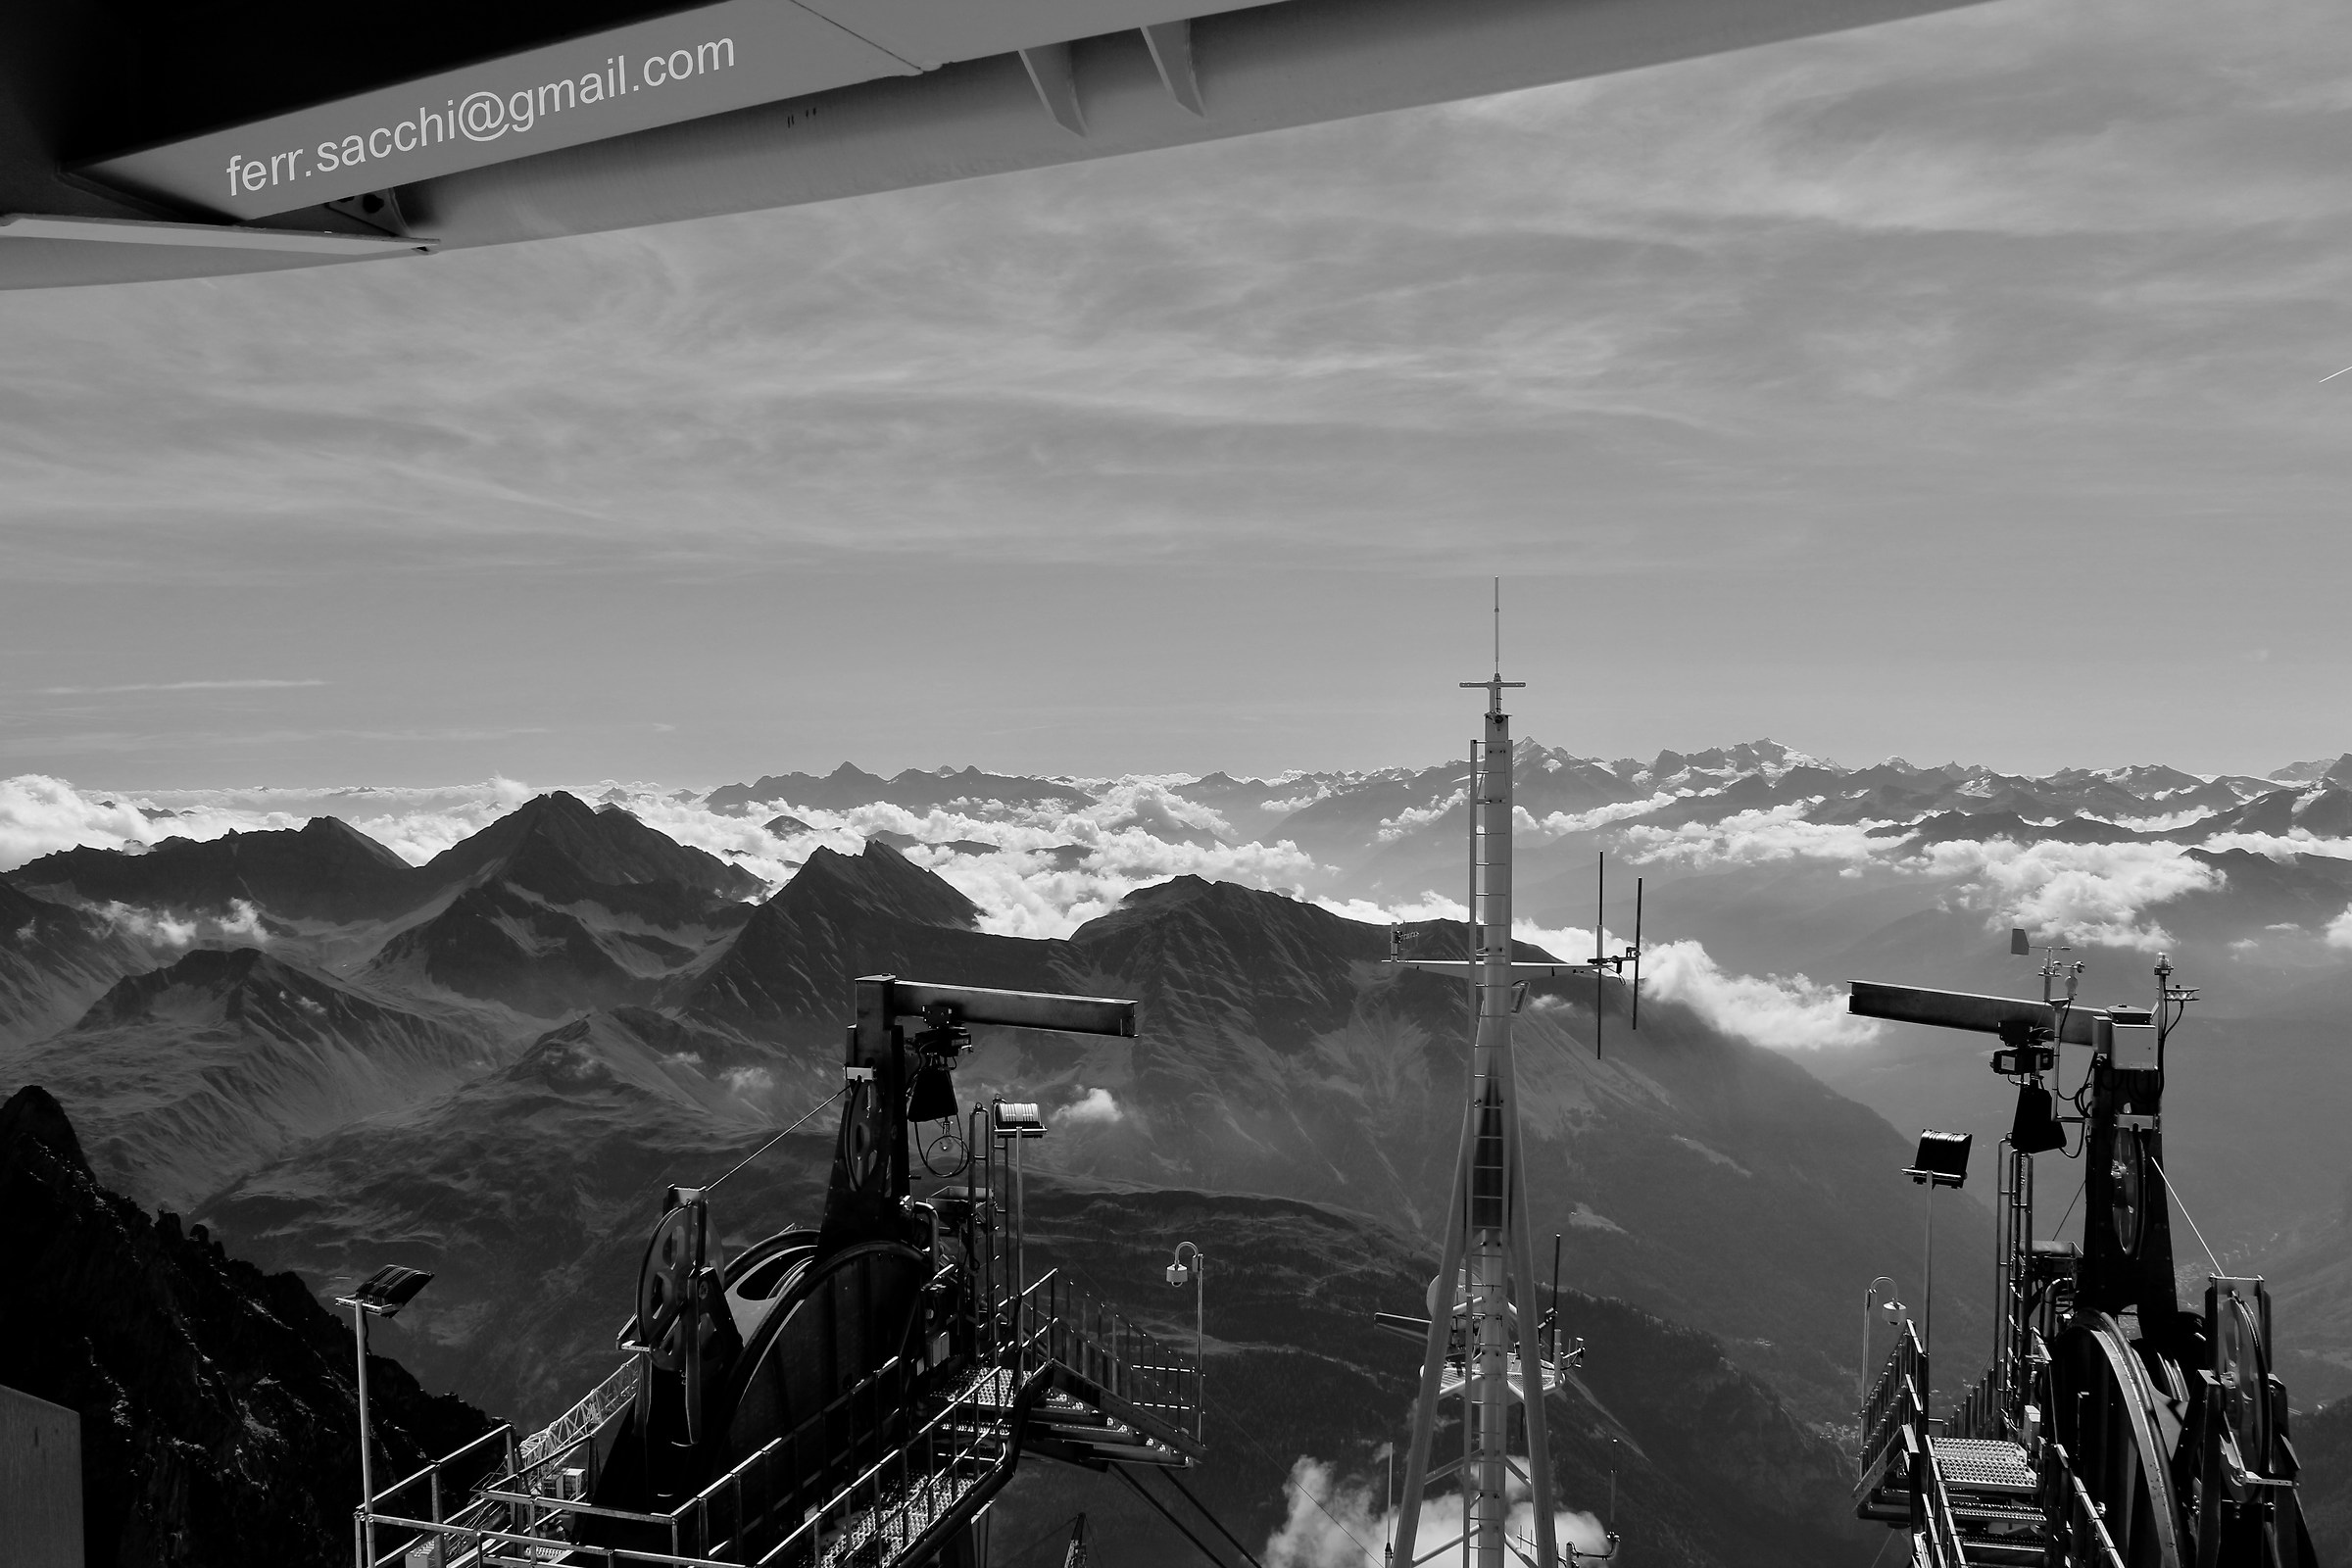 High views from the Punta Helbronner station ...